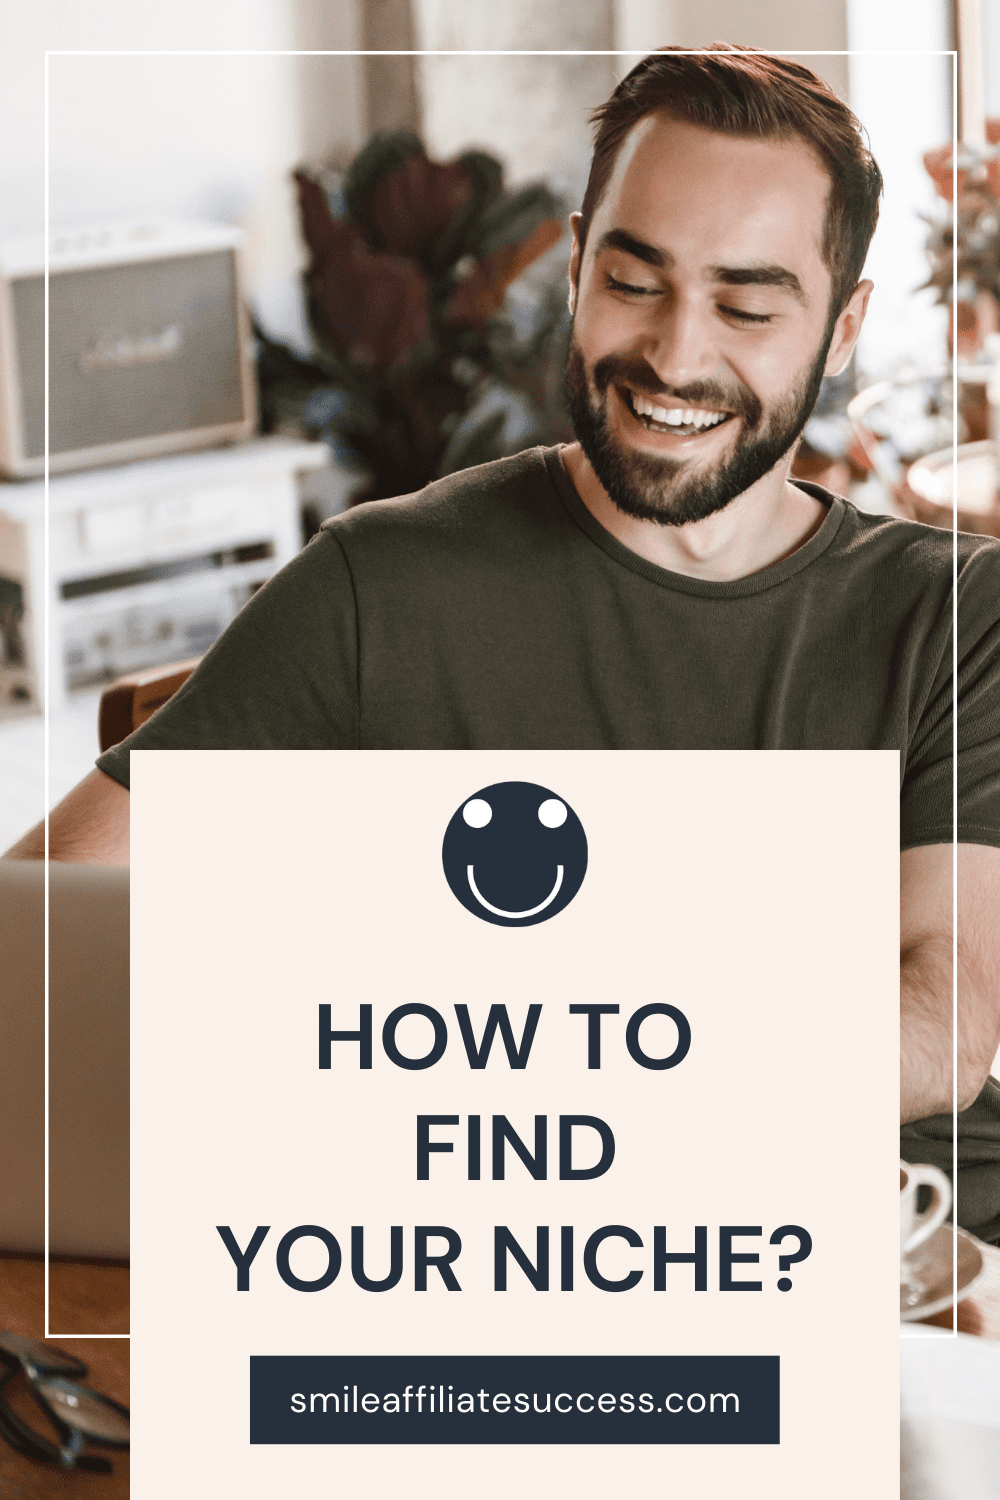 How To Find Your Niche?